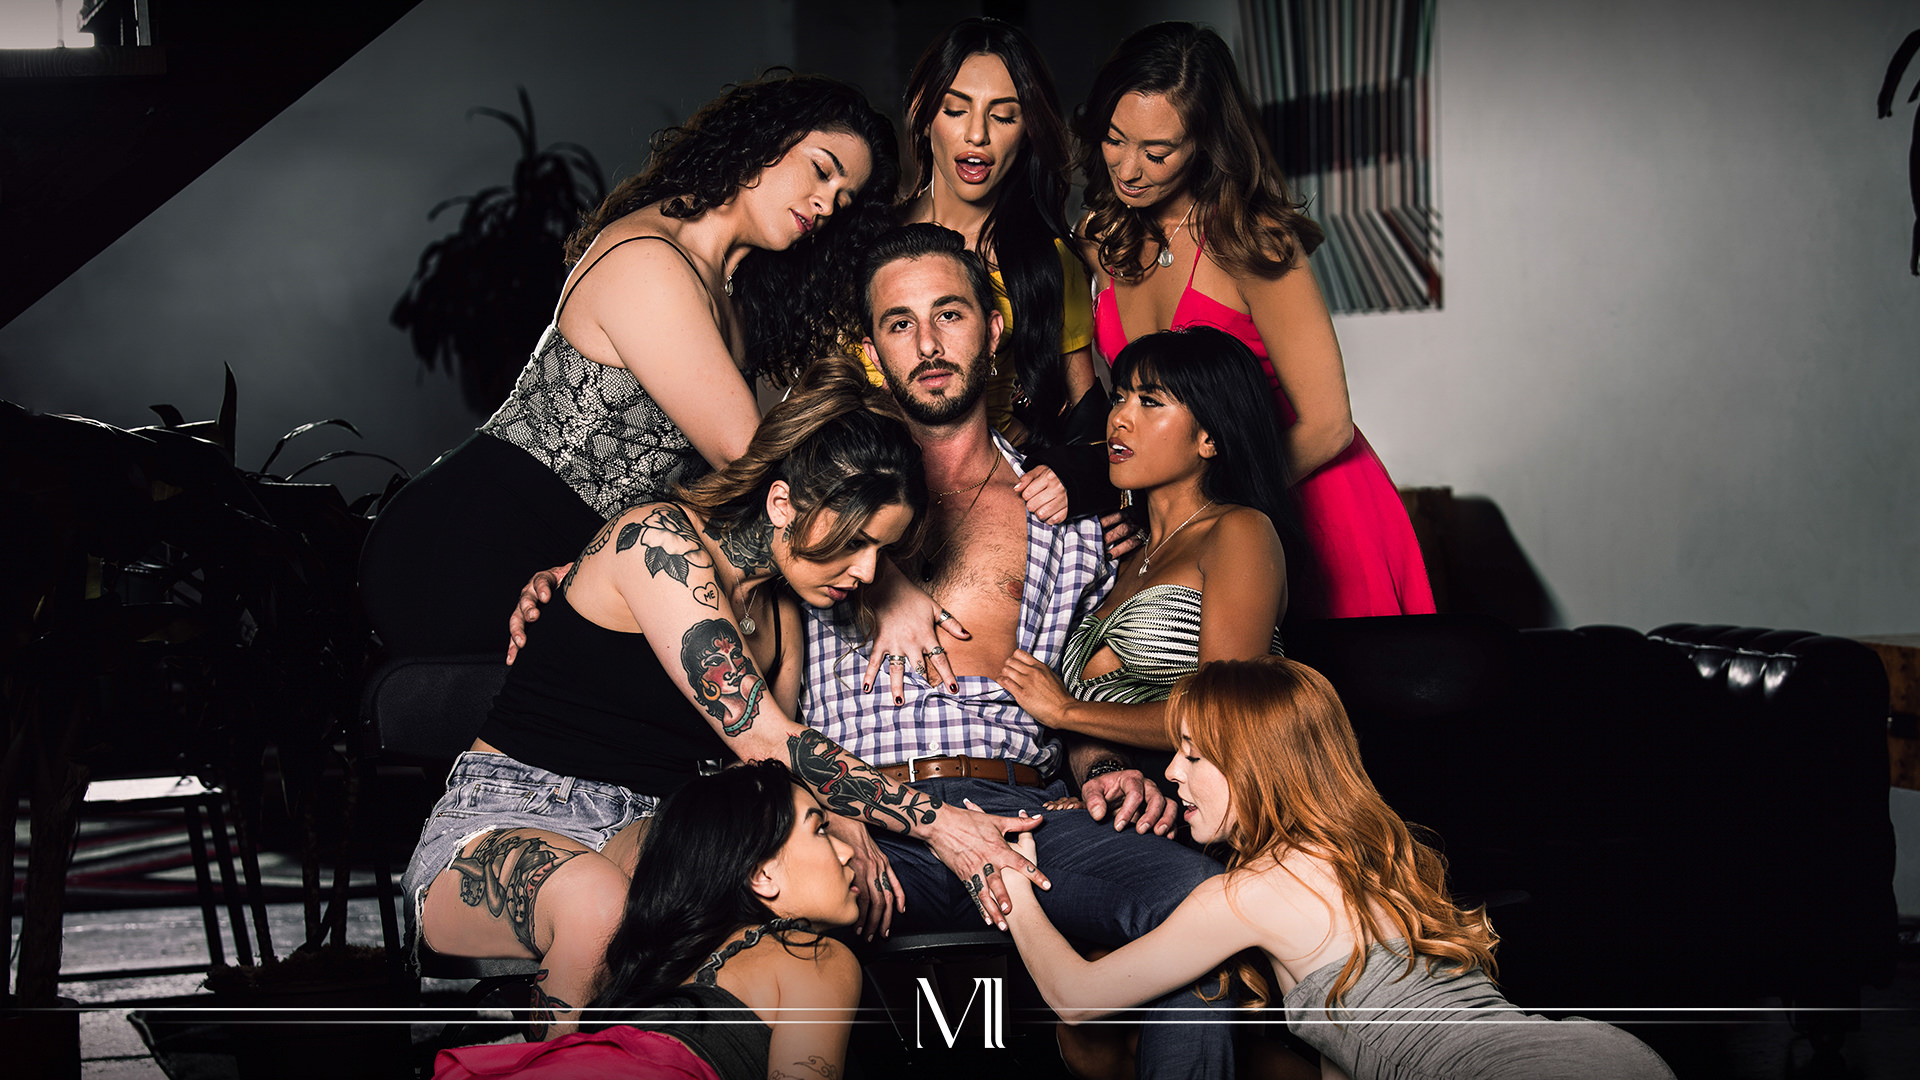 Modern Day Sins Christy Love, Victoria Voxxx, Lucas Frost, Hime Marie, Ember Snow, Madi Collins, Kimmy Kimm, Vanessa Vega Sinners Anonymous